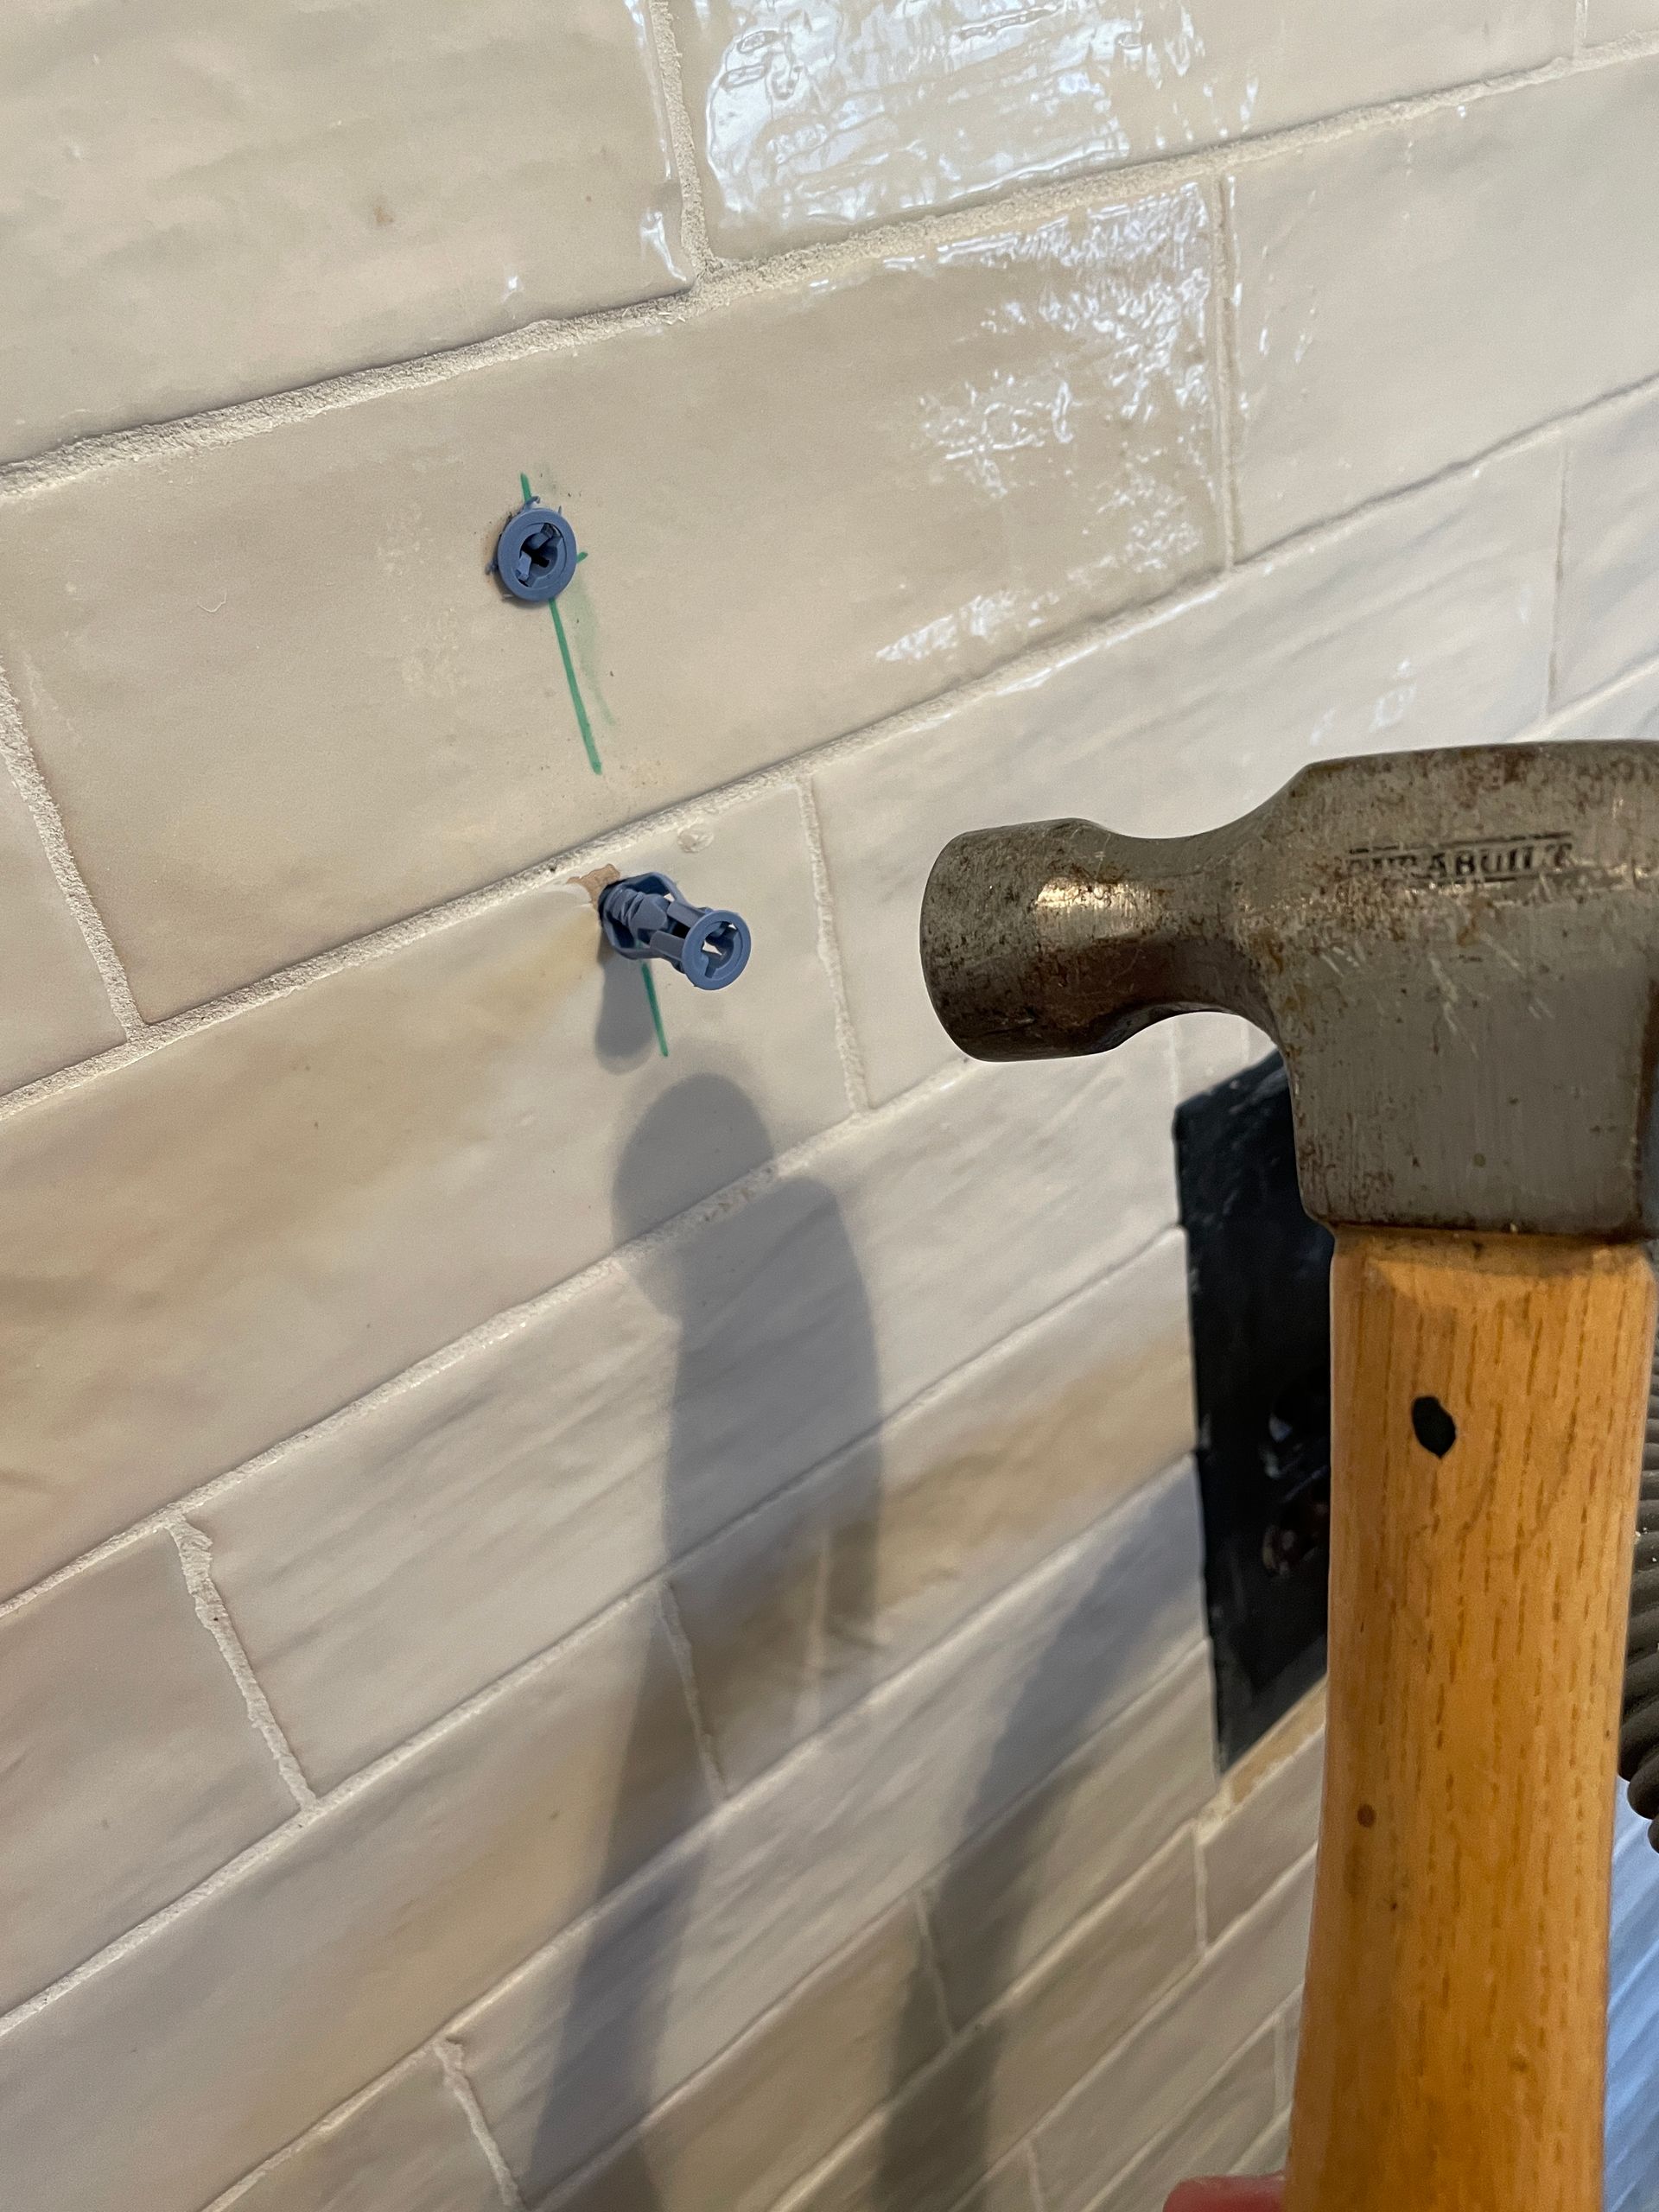 Drywall anchors for tile